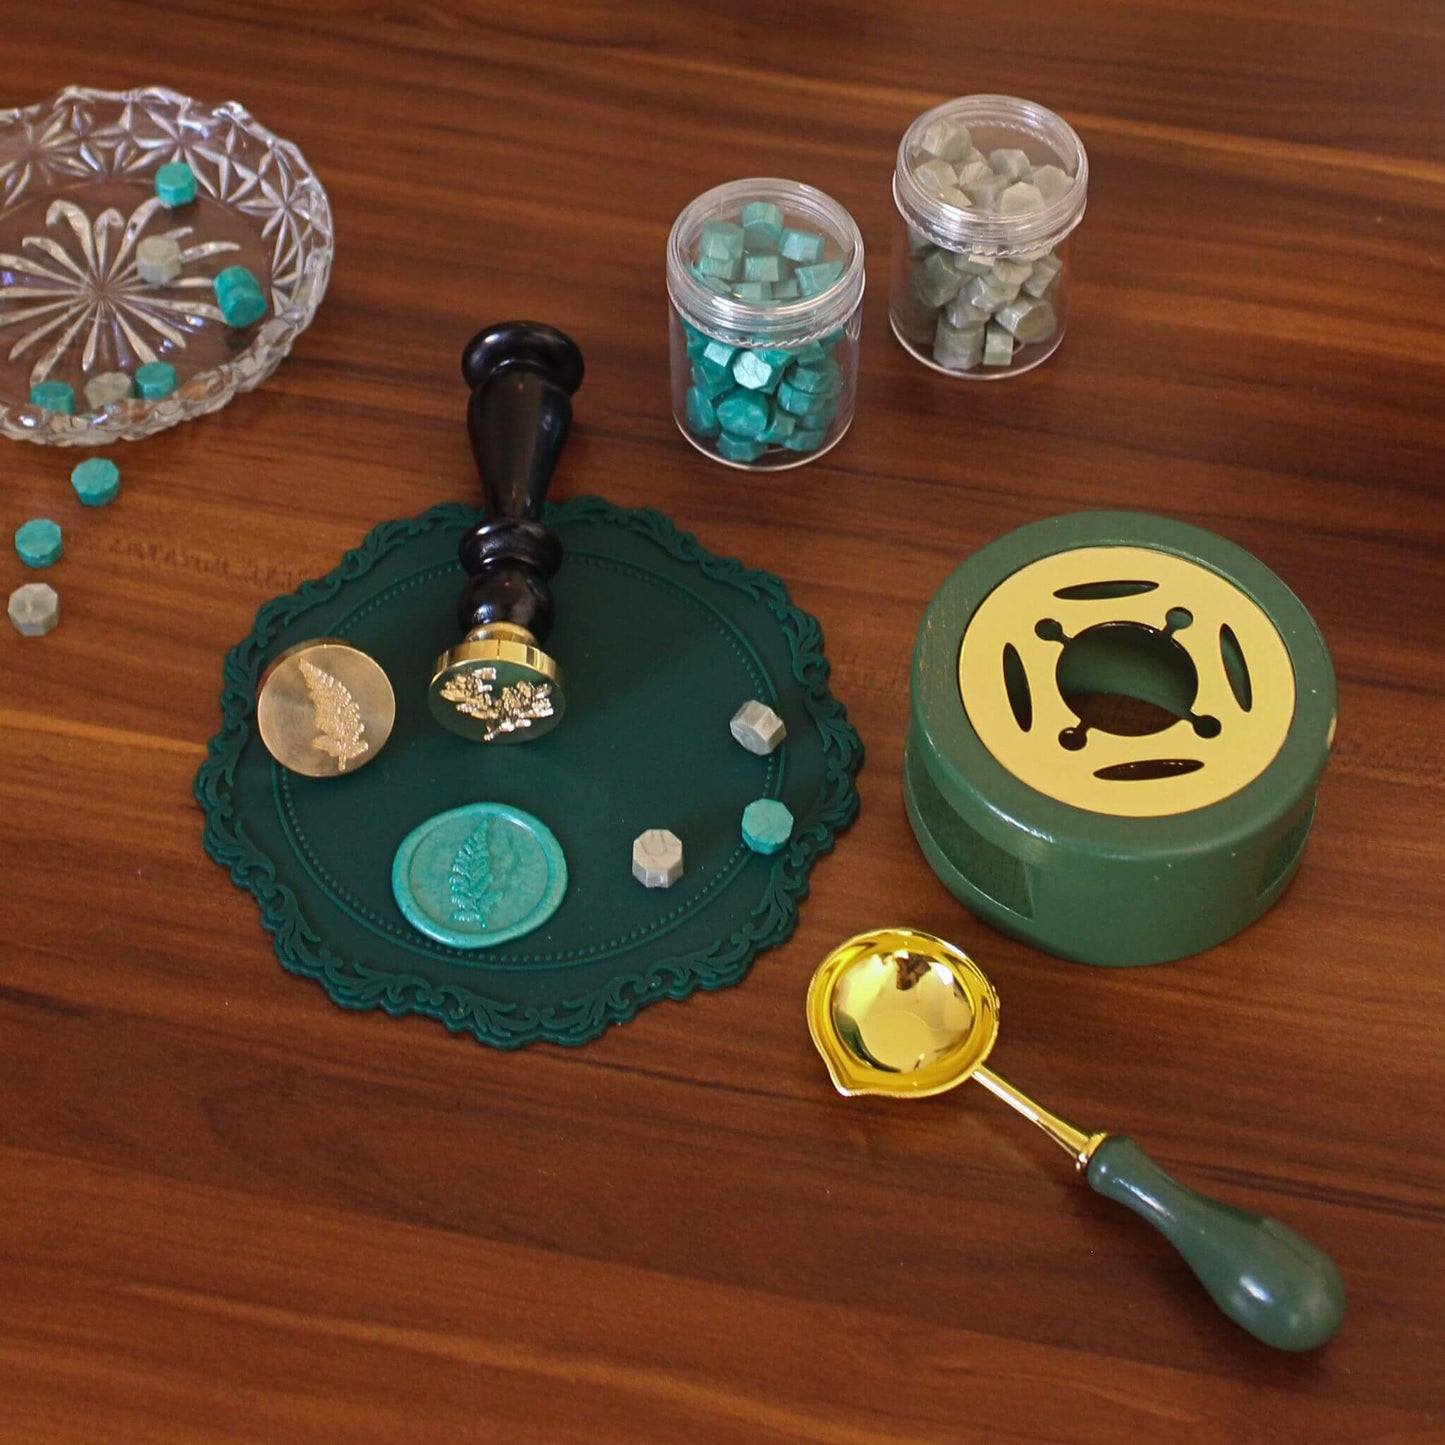 green wax seal kit laid out on desk with green sealing wax, fern and foliage wax seals and wax melting stove and spoon in green